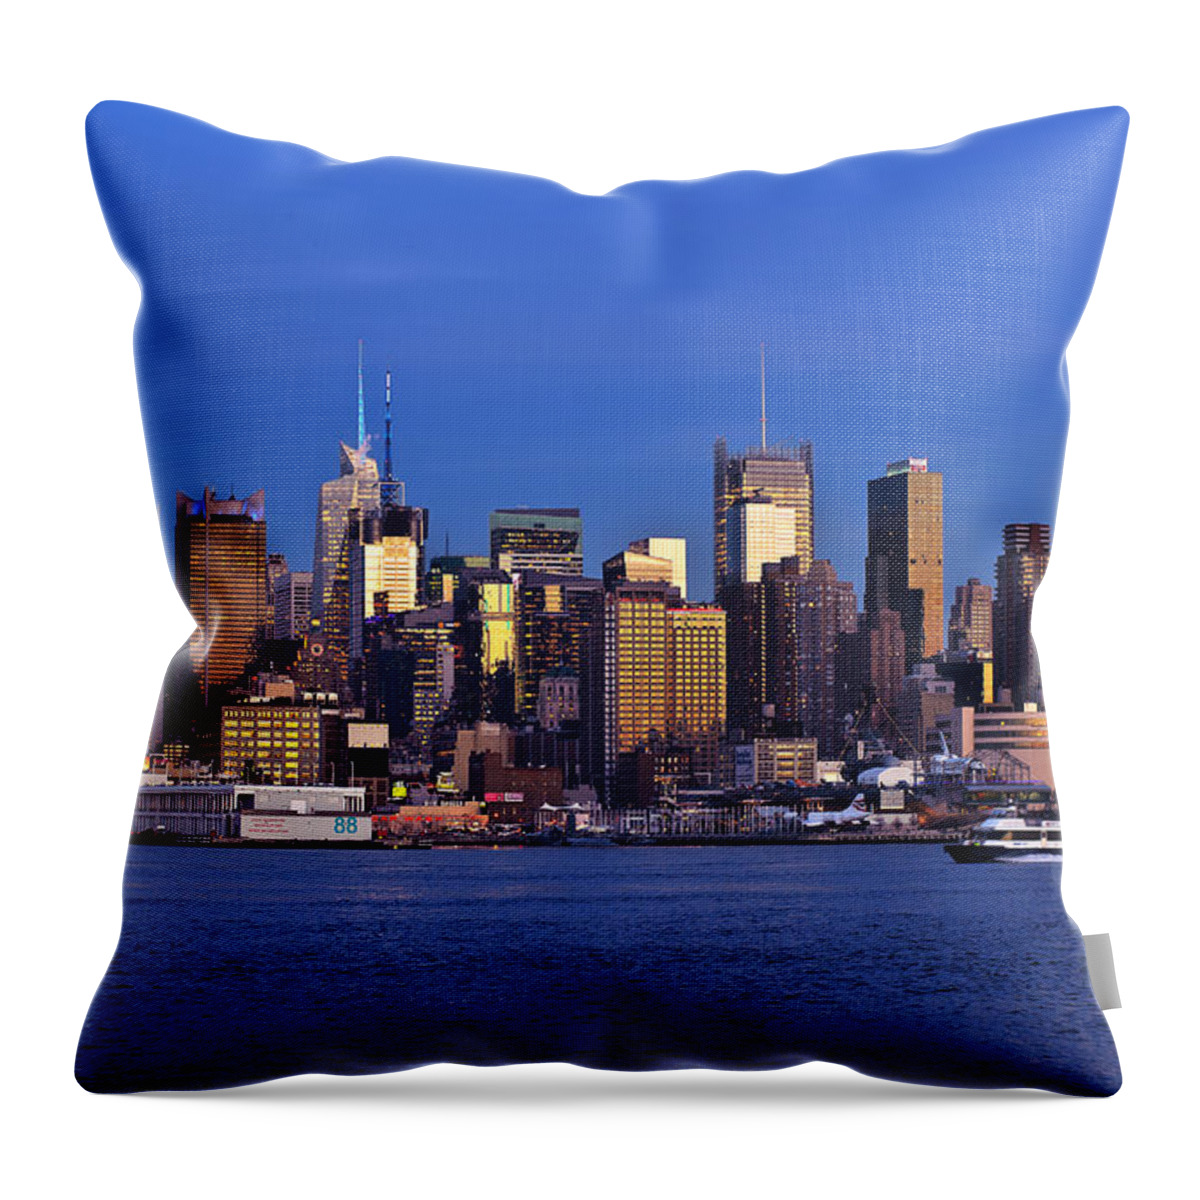 Best New York Skyline Photos Throw Pillow featuring the photograph NY Skyline at Twilight by Mitchell R Grosky